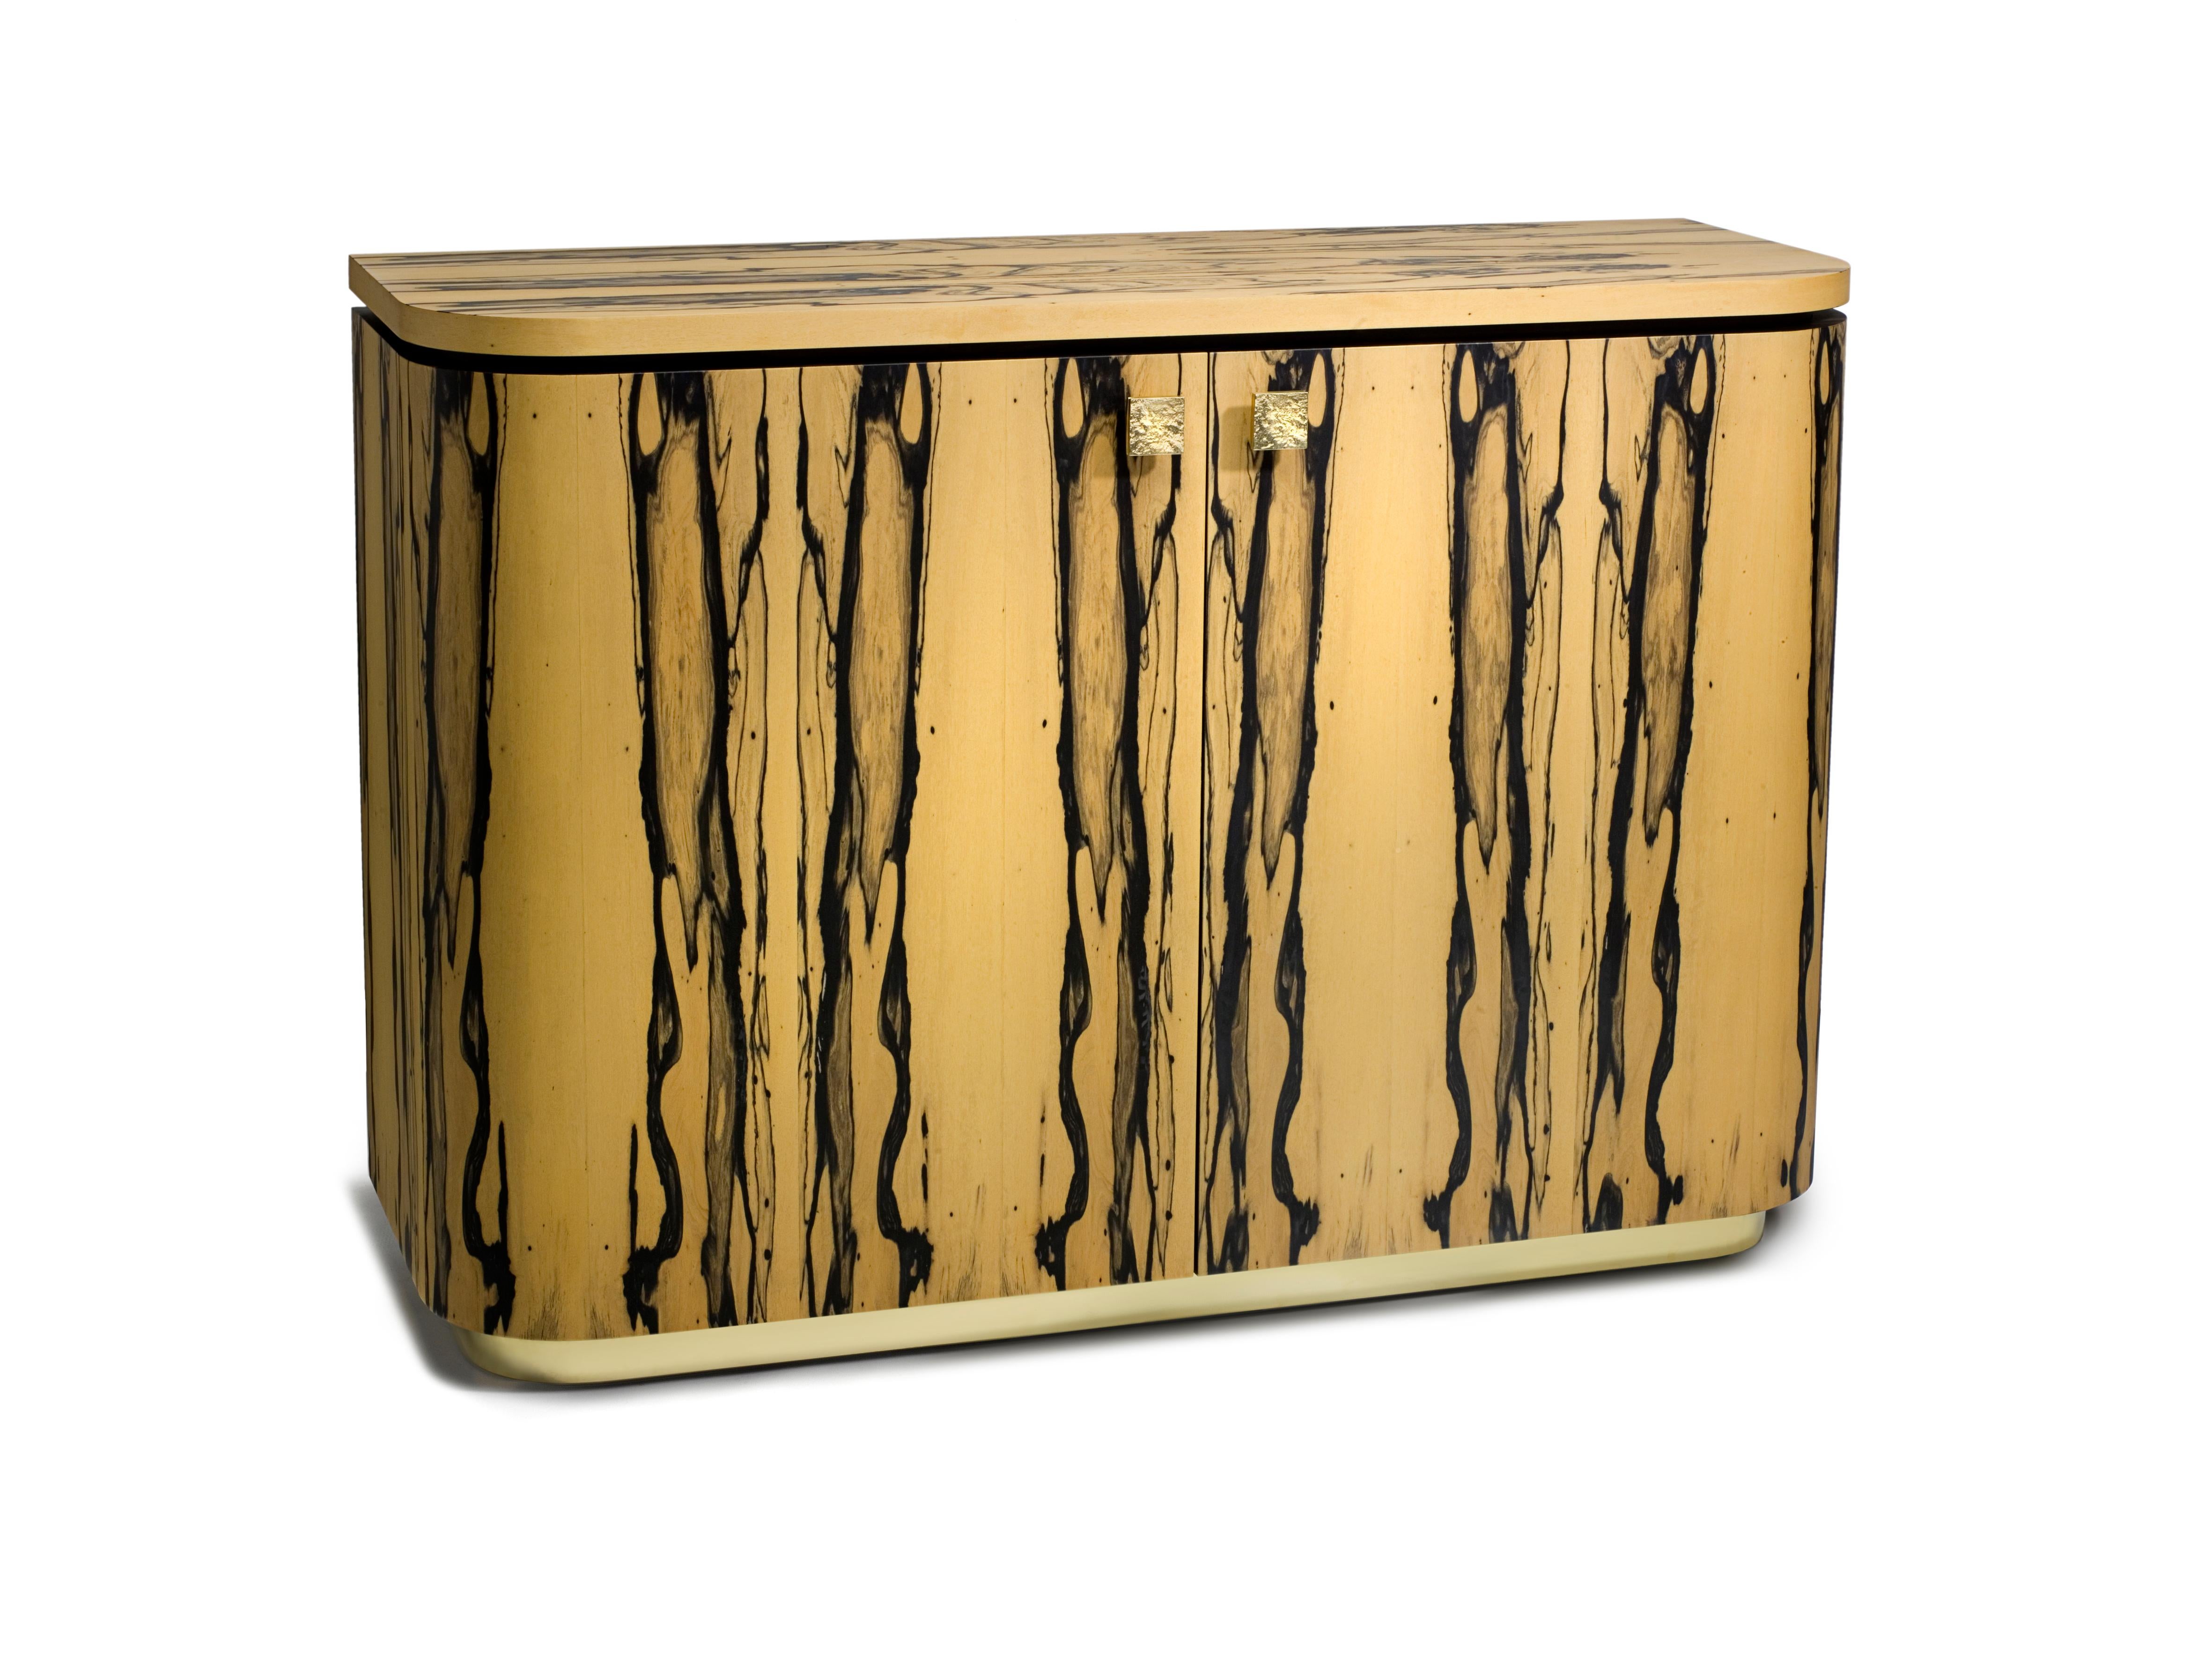 Inspired by the sweeping lines of Art Deco pieces the Riccardo sideboard was designed by Simon Stewart for Charles Burnand.

The curved front, sides and back in striking white ebony veneer contrasts with the Macassar ebony interior and glass